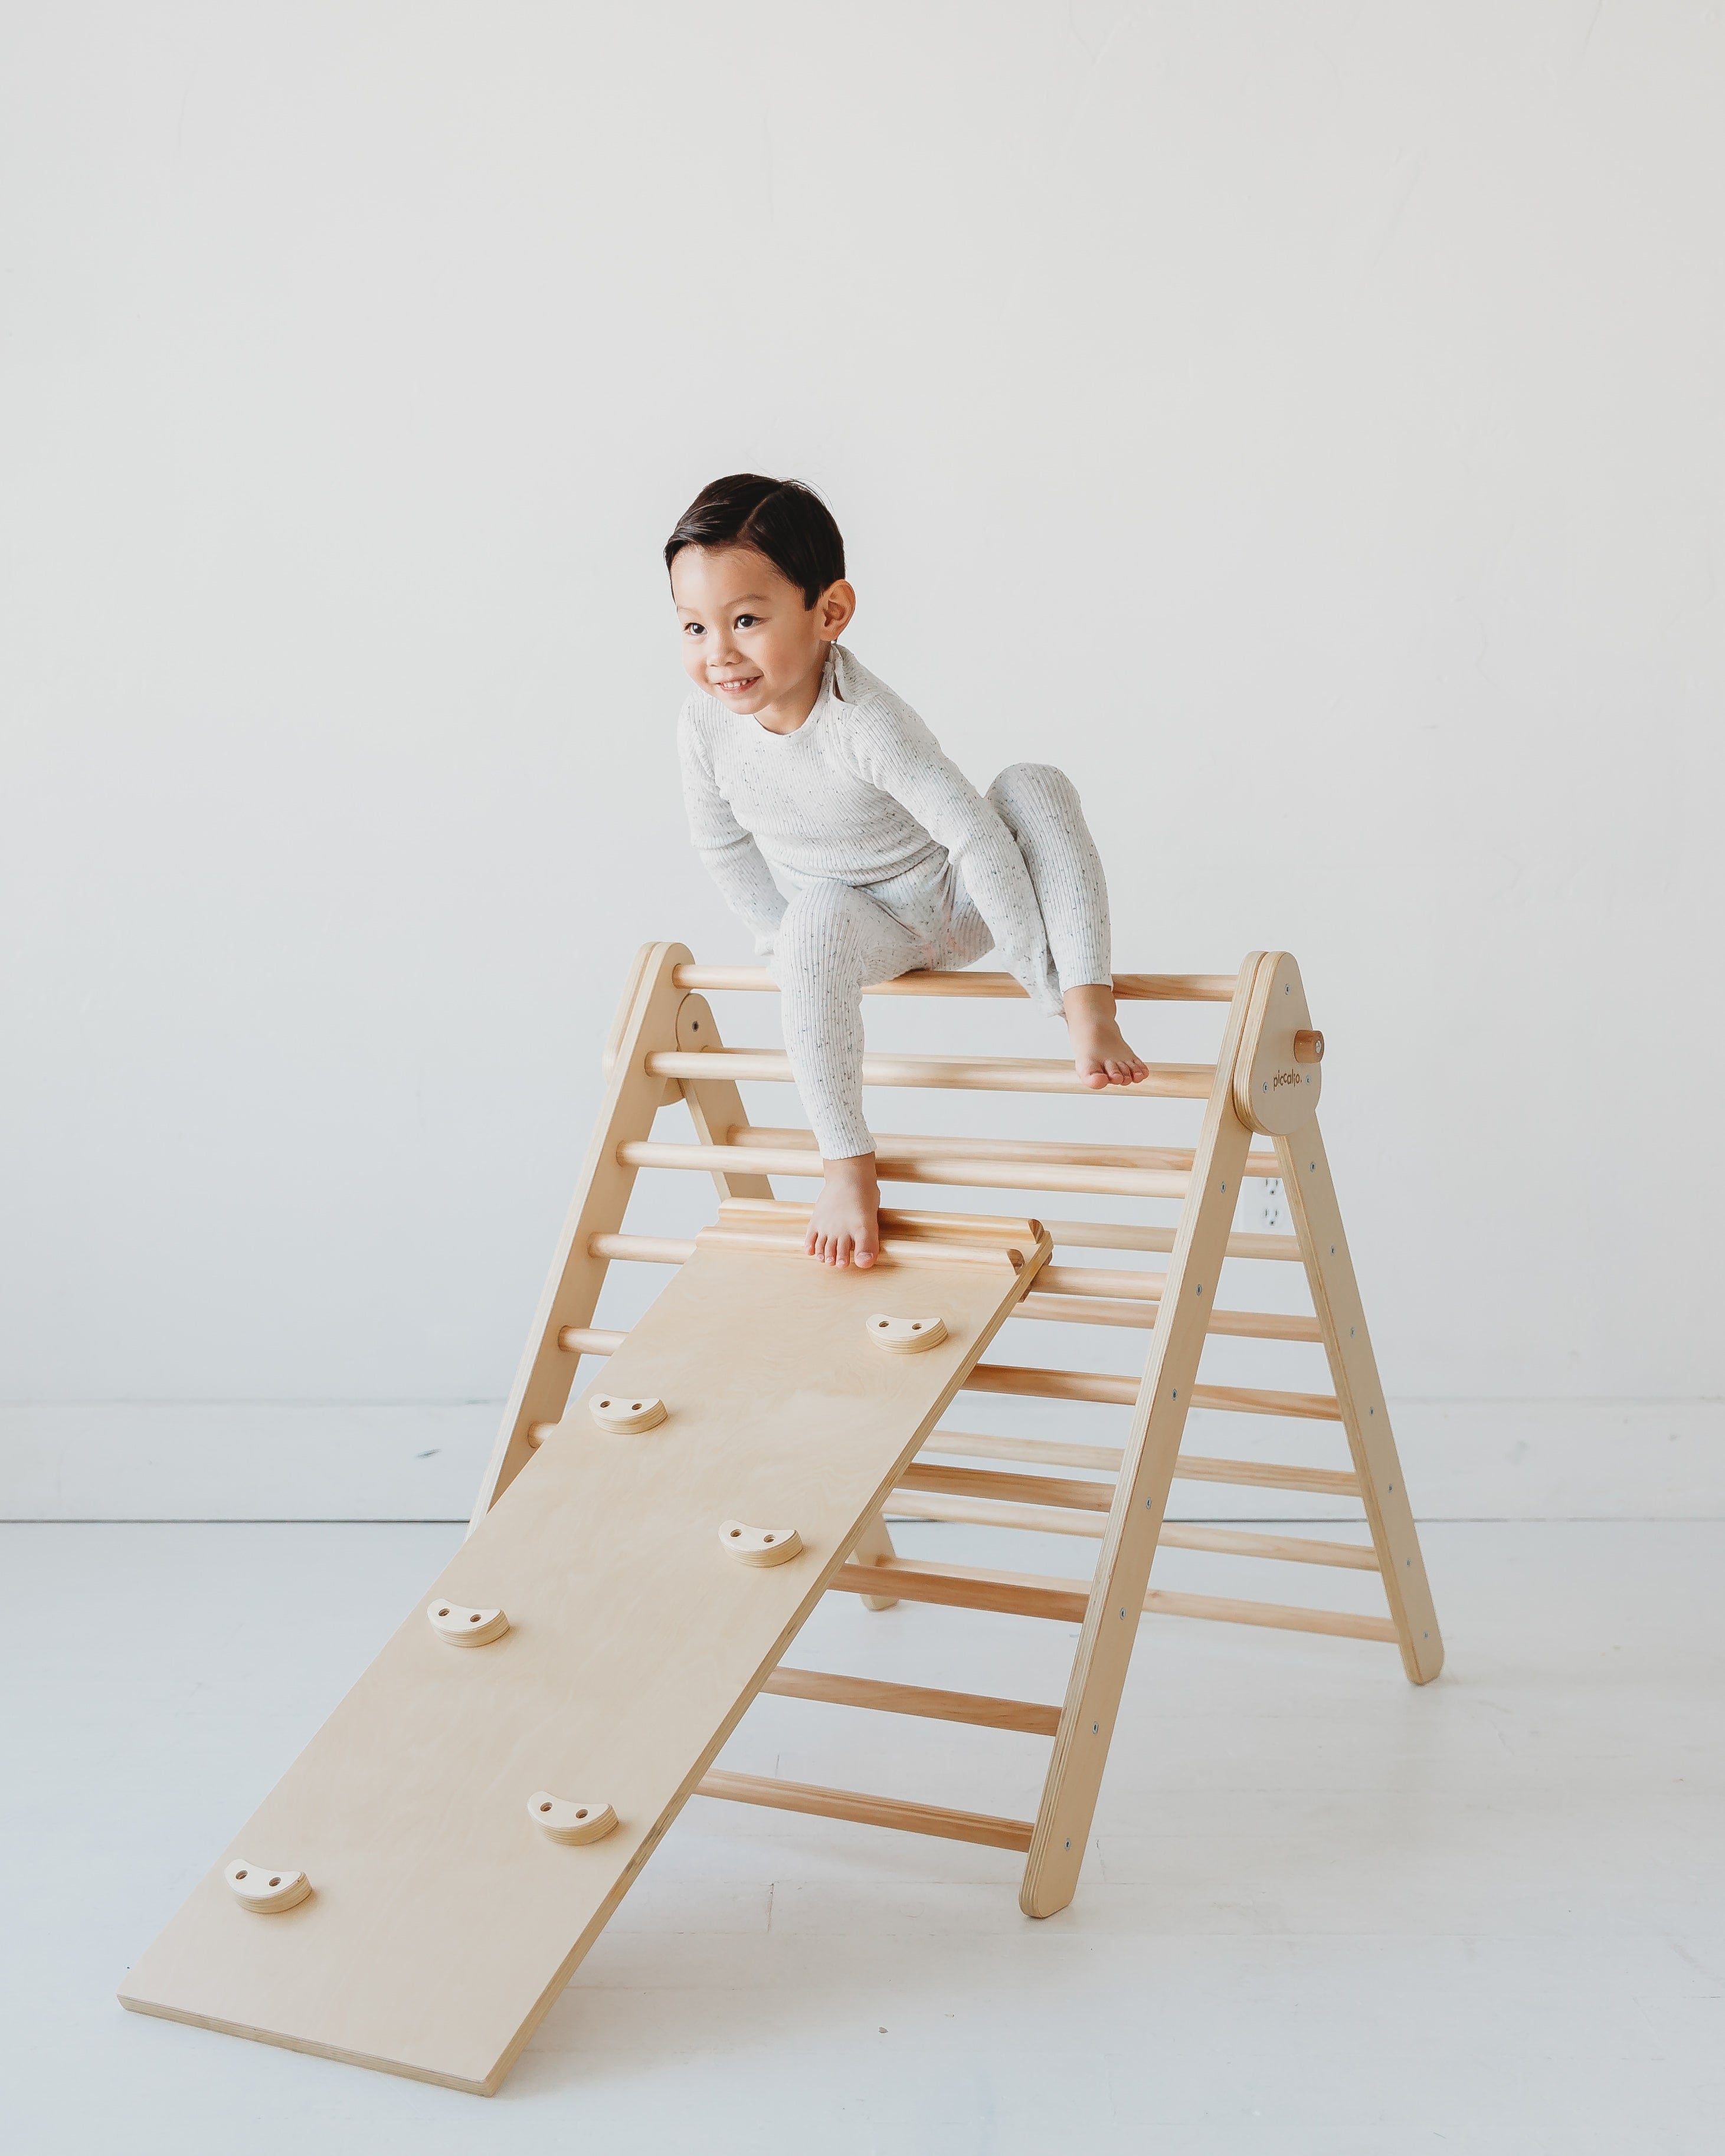 Types of Toddler Slides and Climbers